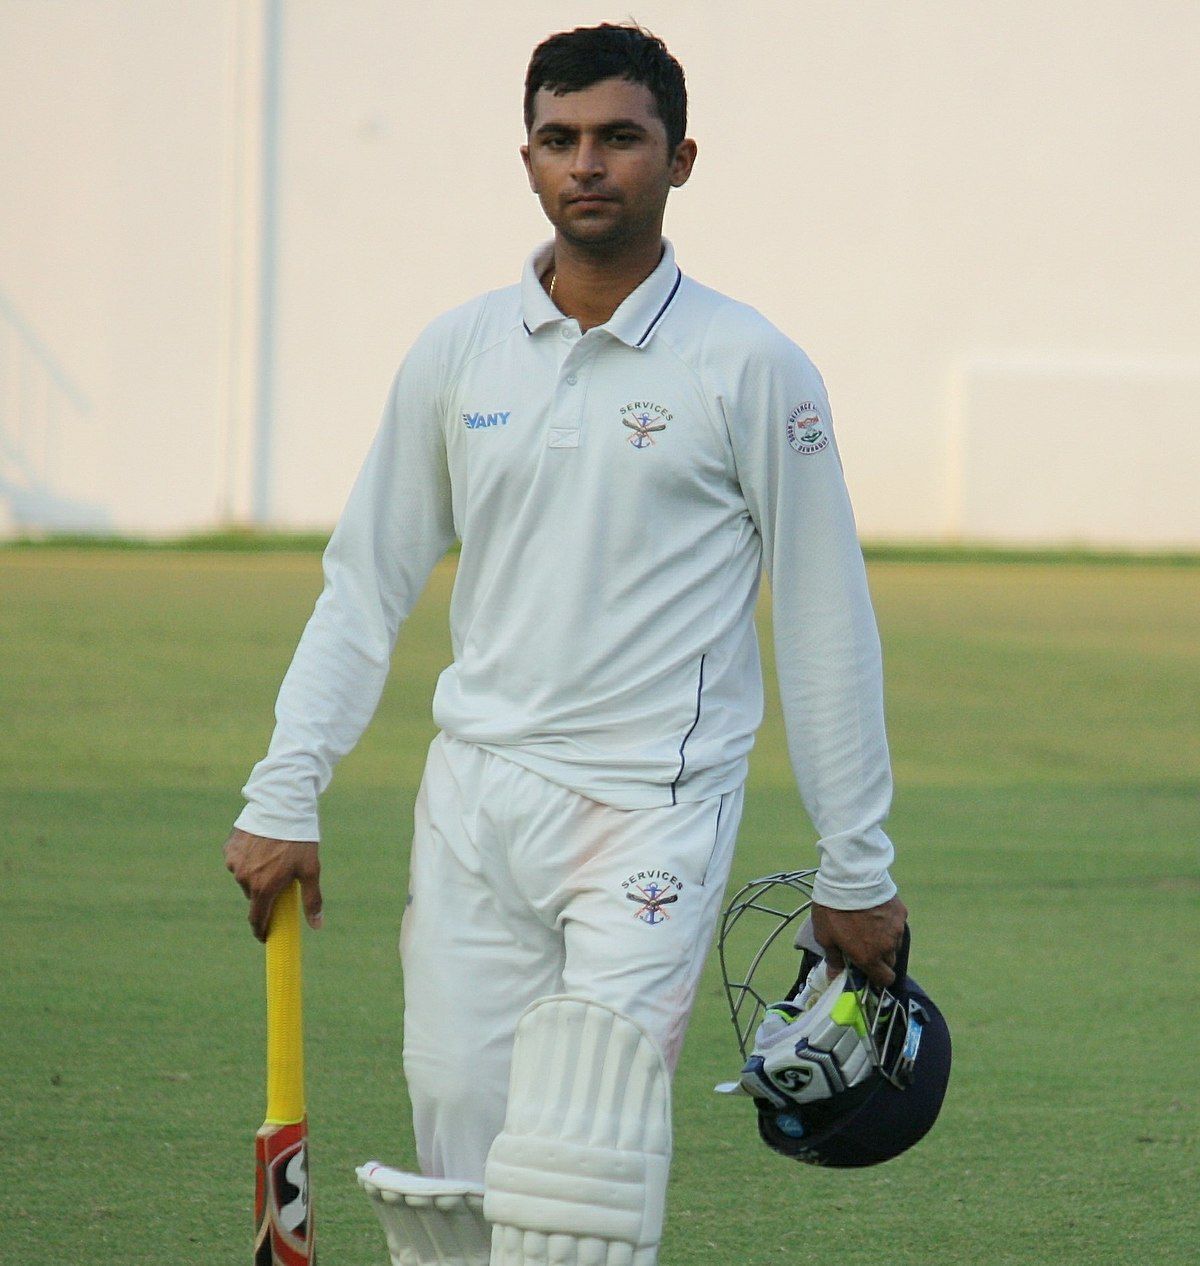 Rahul Singh is back playing for Hyderabad.